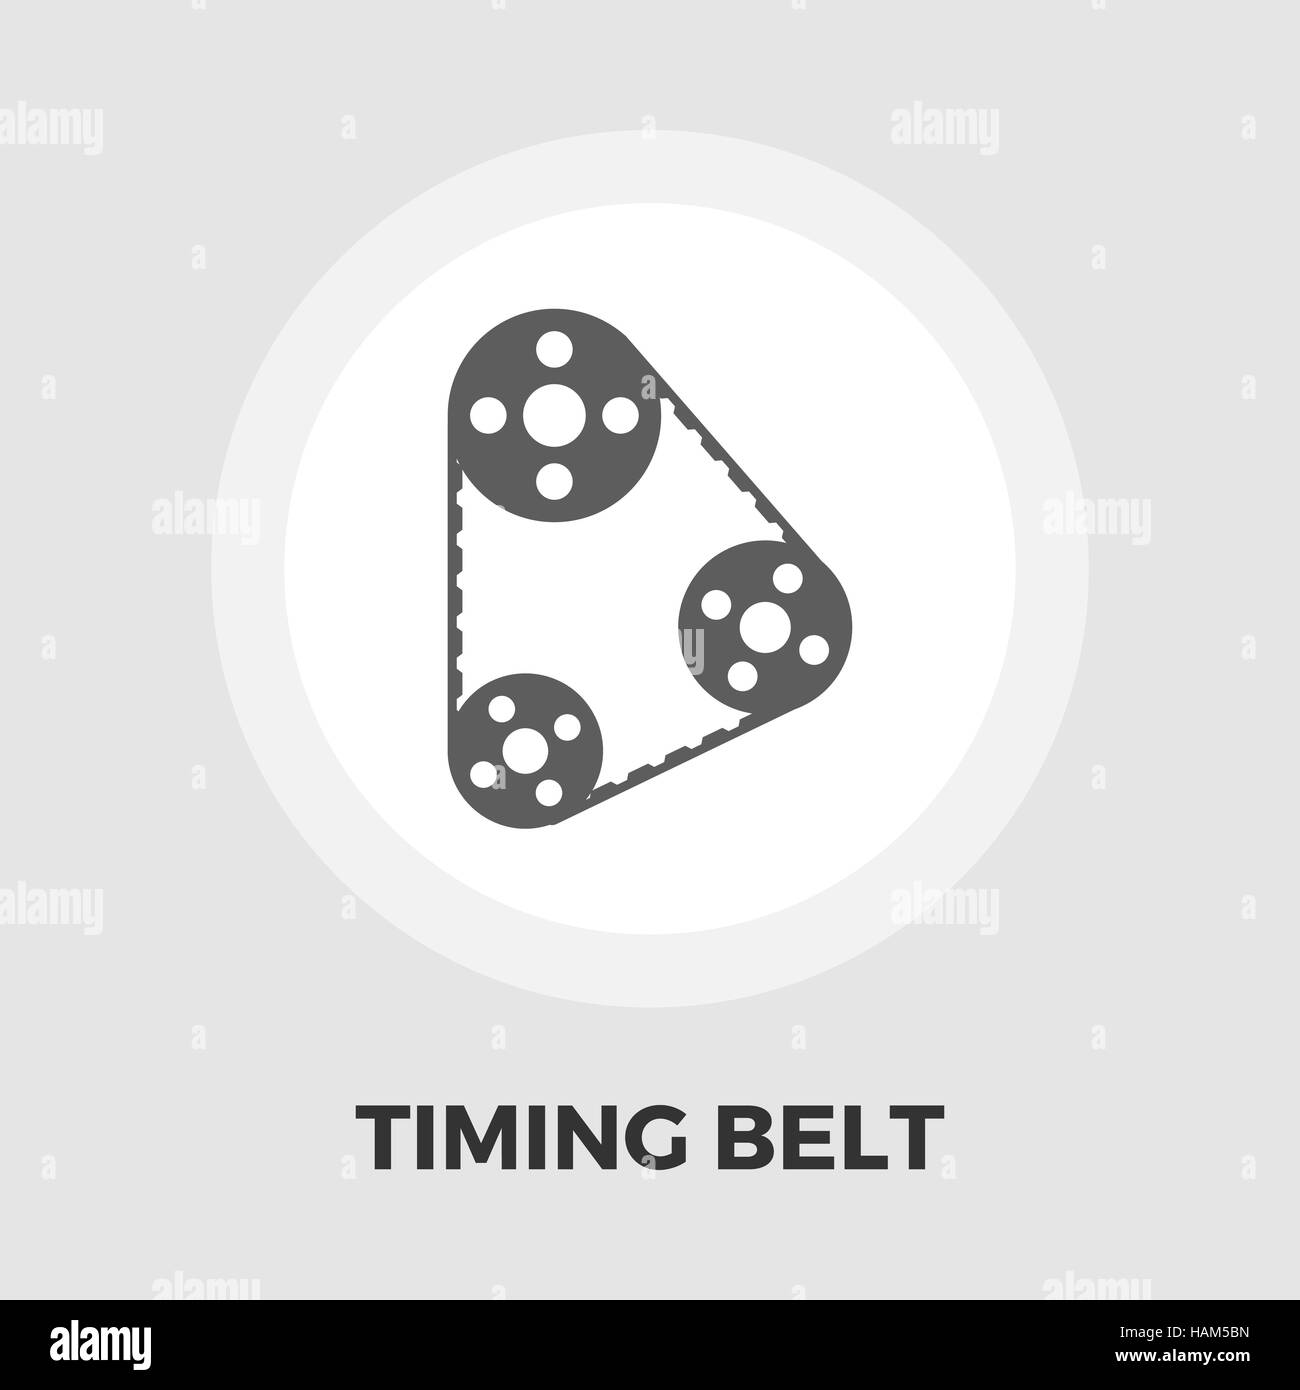 Timing belt icon vector. Flat icon isolated on the white background. Editable EPS file. Vector illustration. Stock Vector